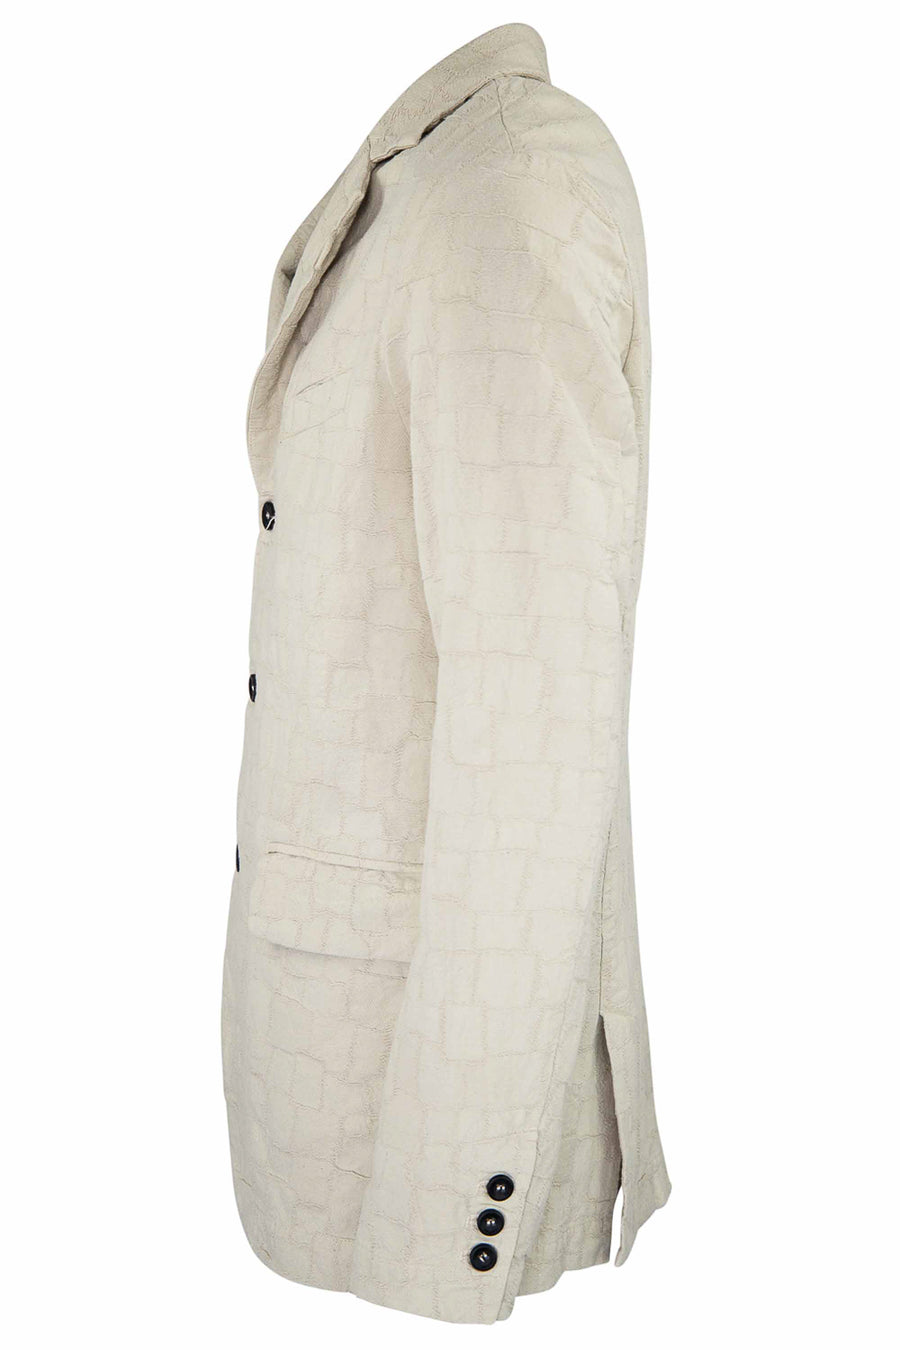 Buy the Hannes Roether Croc-Effect Cotton Blazer in Off White at Intro. Spend £50 for free UK delivery. Official stockists. We ship worldwide.